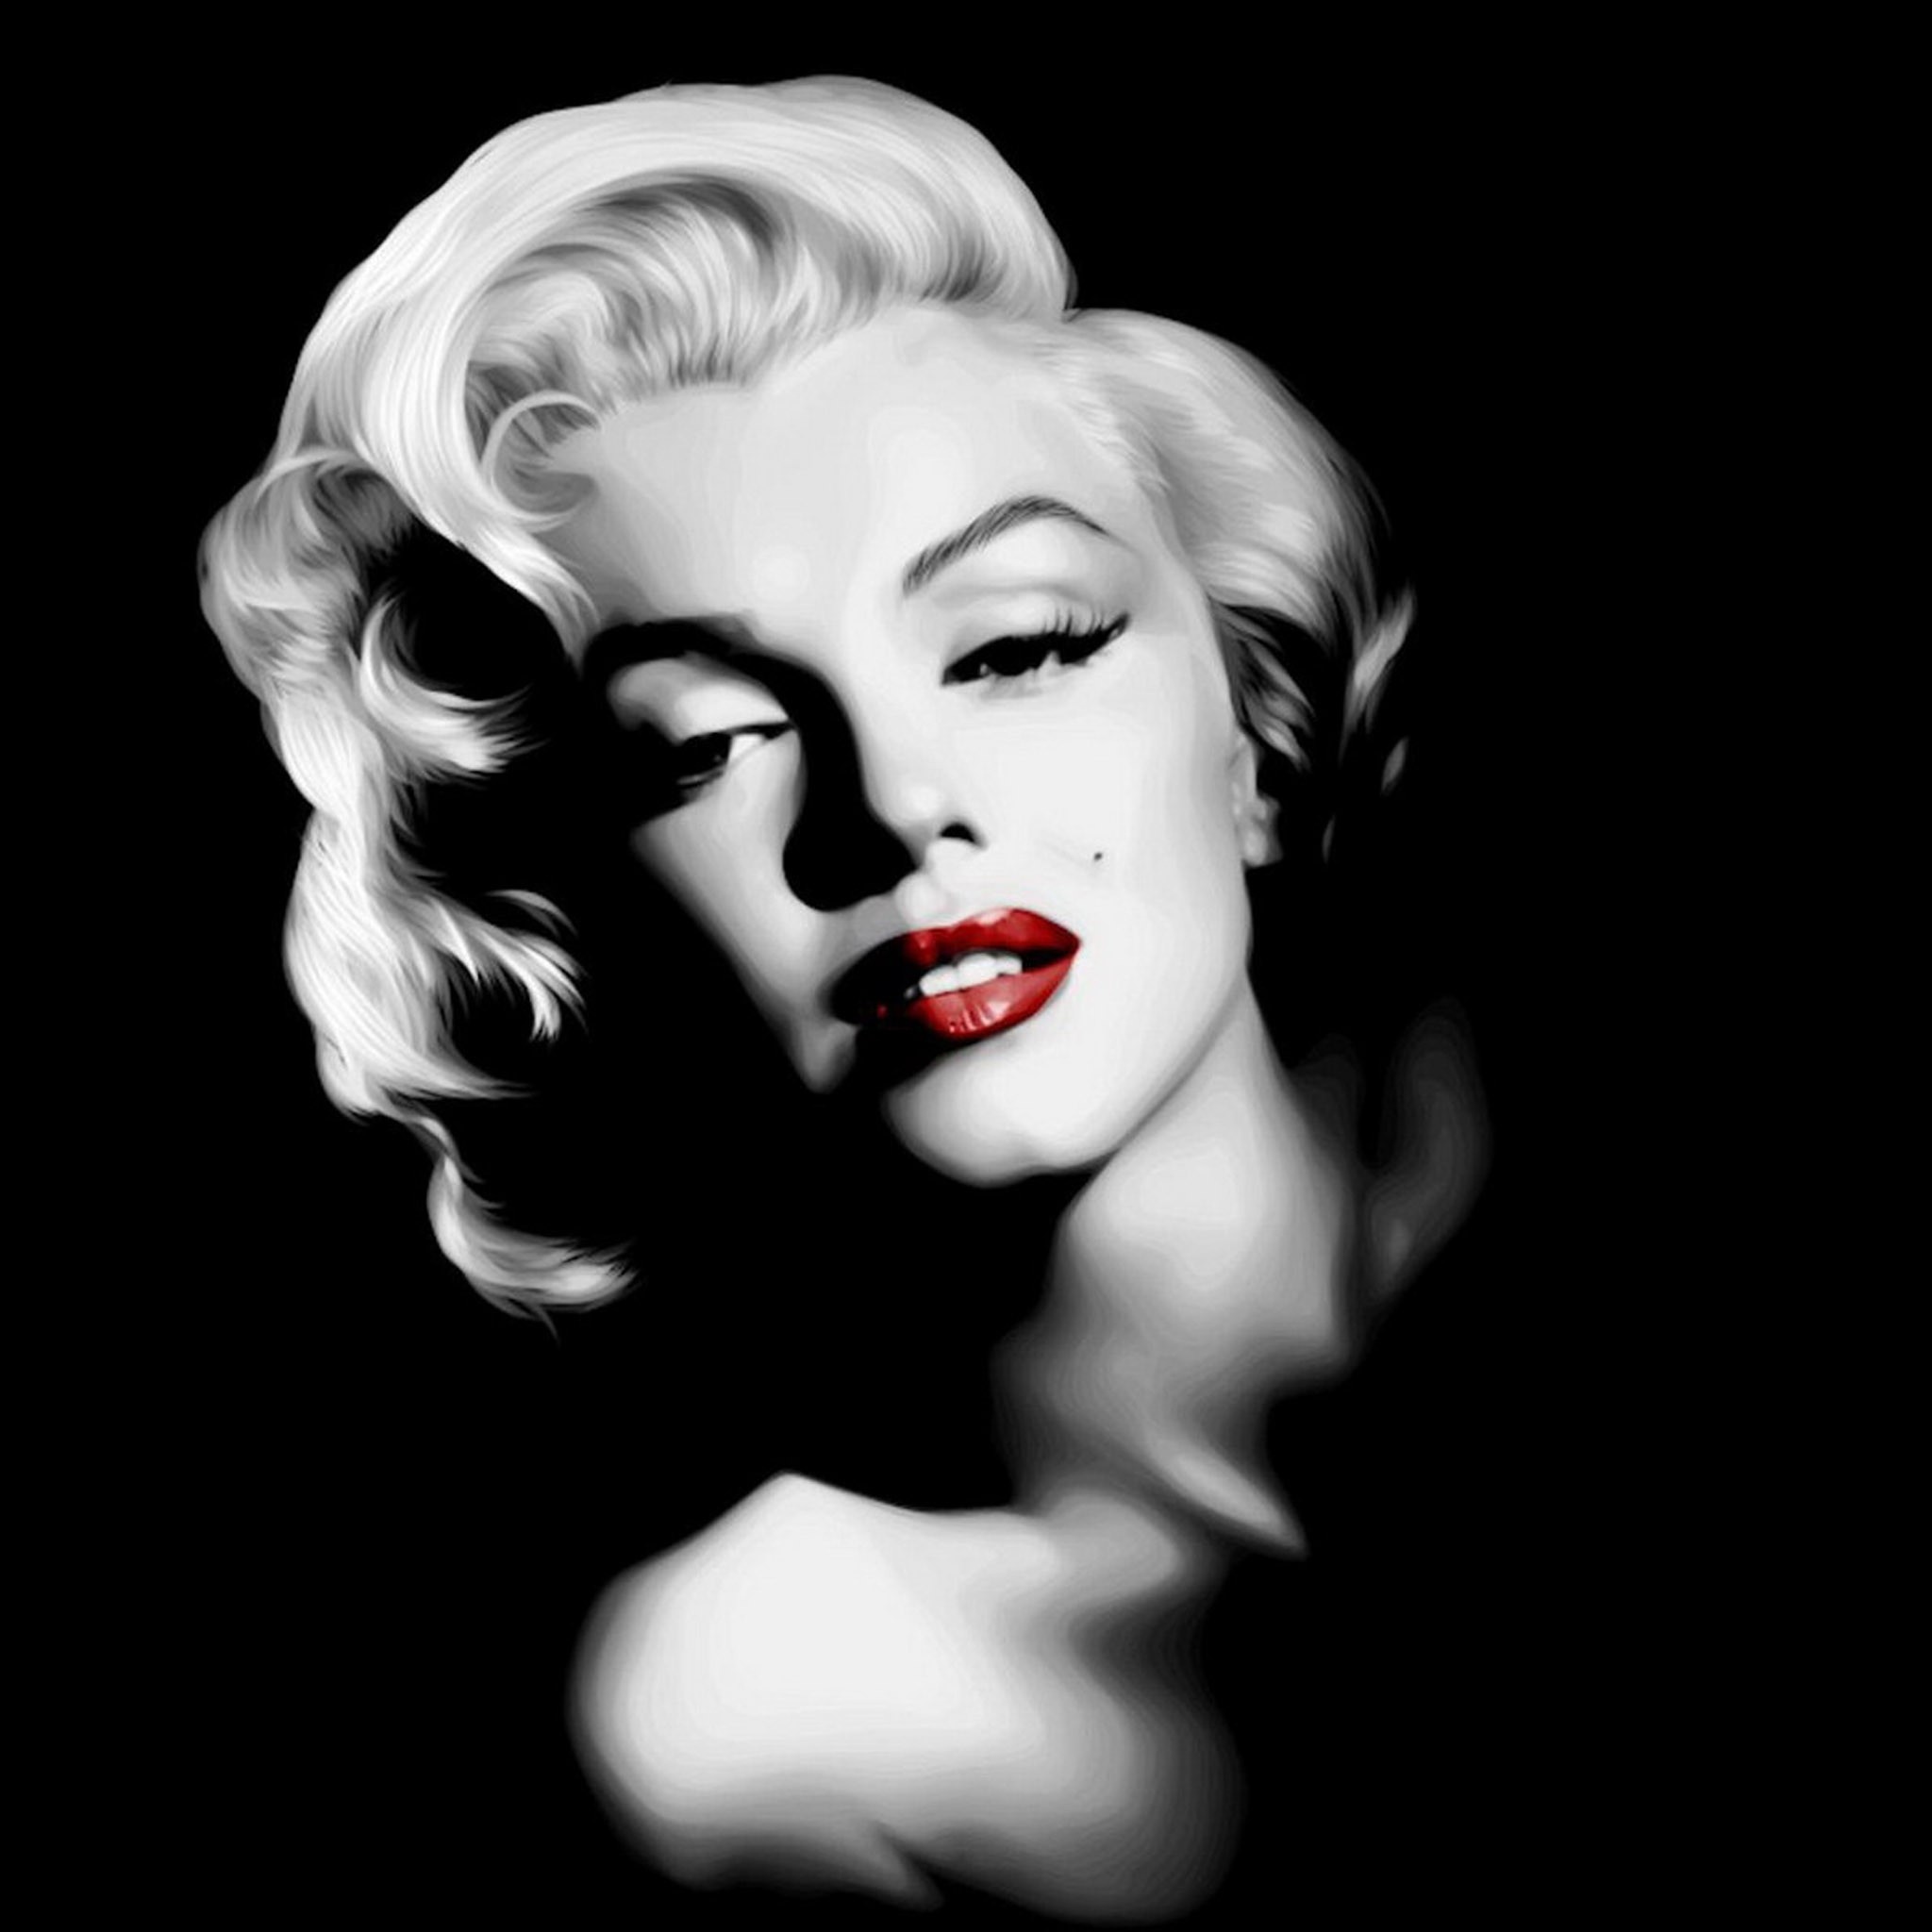 Marilyn Monroe, Classic desktop wallpaper, Quality images, Live wallpaper collection, 2050x2050 HD Handy